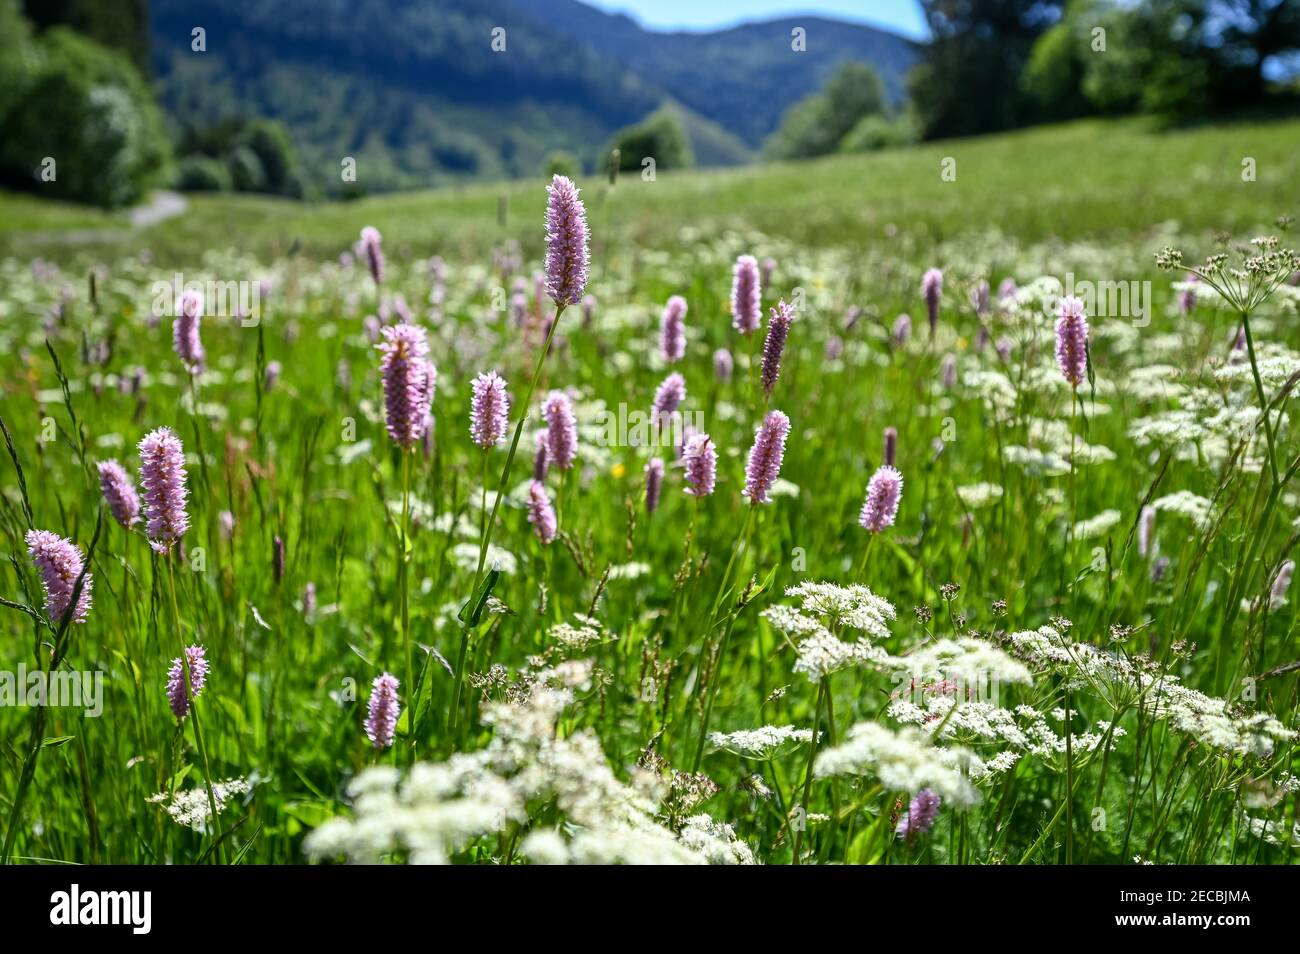 A field of the flower persicaria on a sunny day Stock Photo